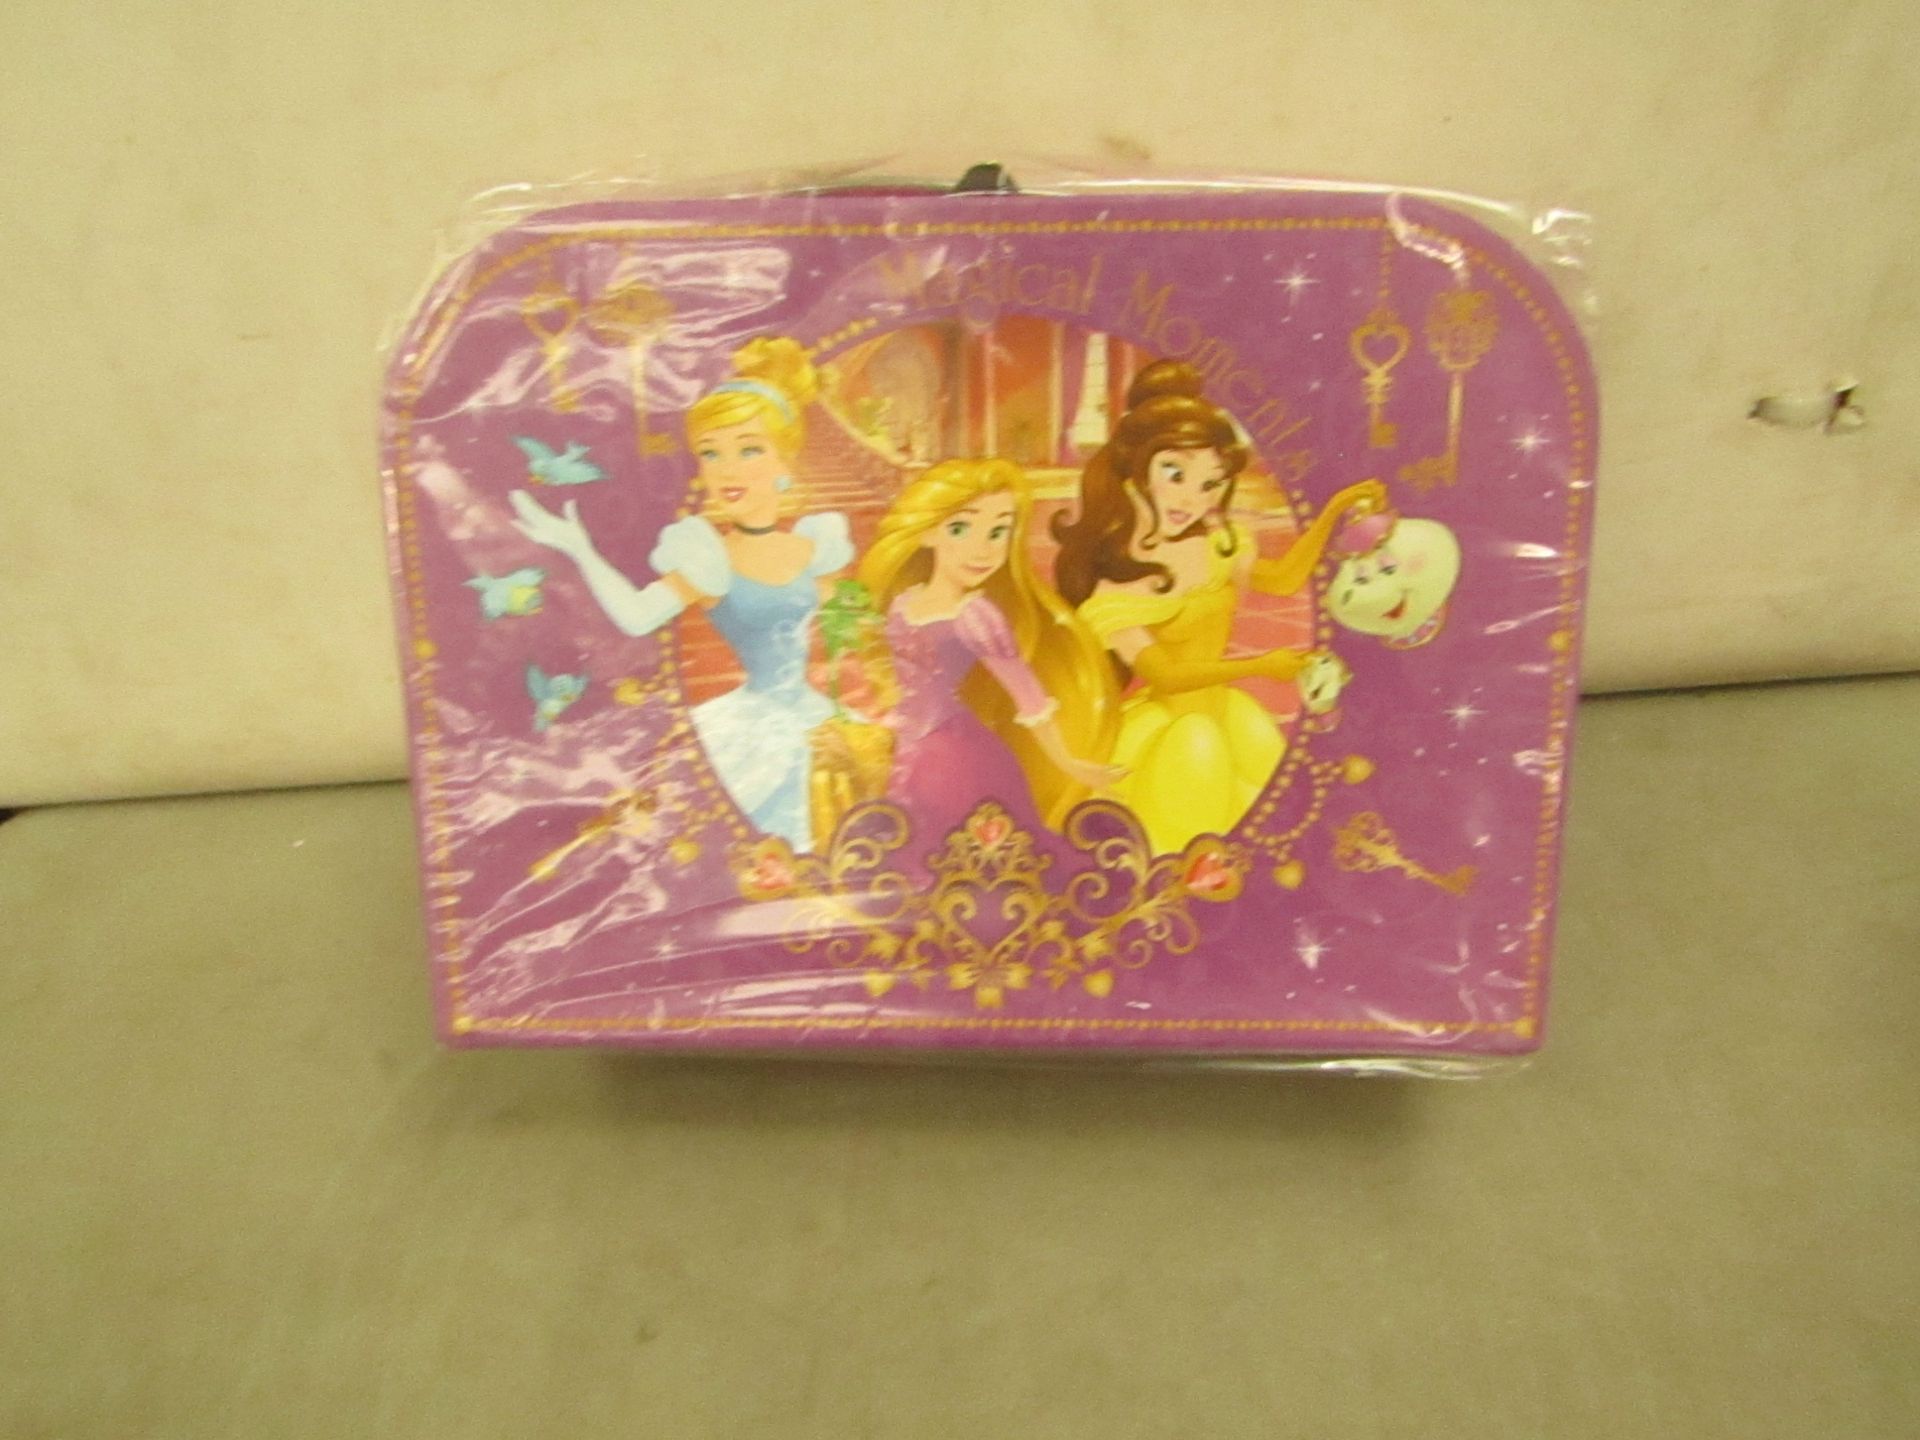 Disney Princess Lunch boxes - New & Packaged.